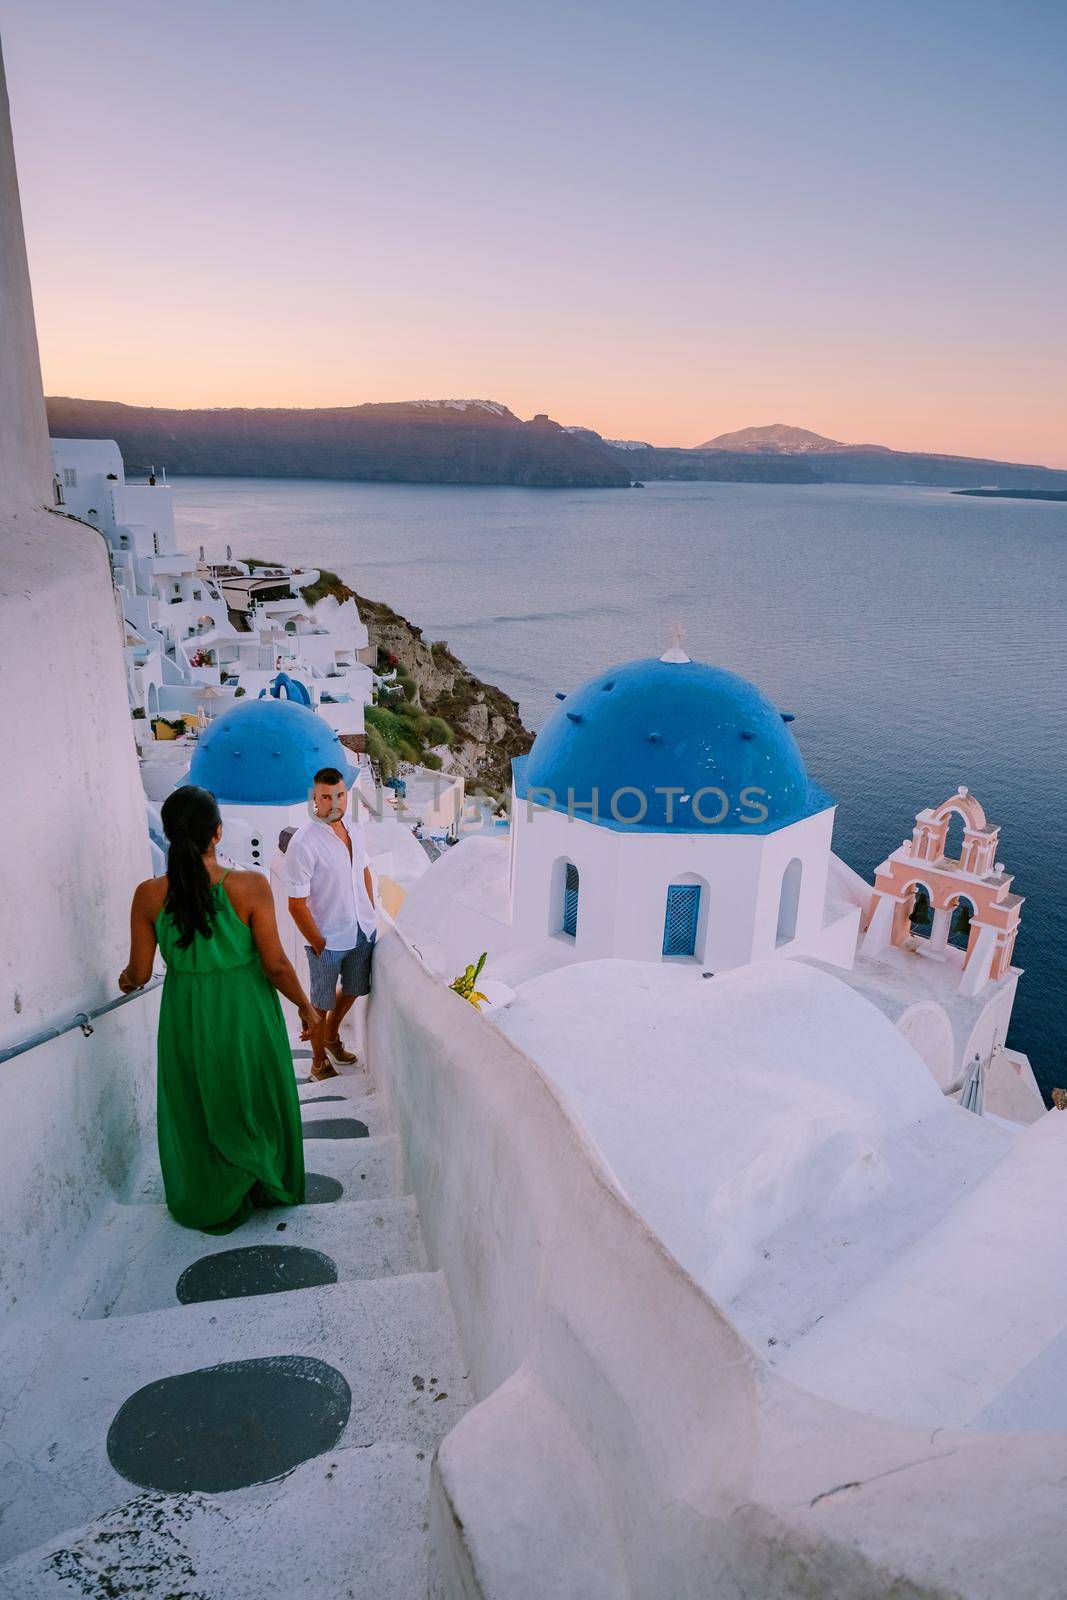 Santorini Greece, young couple on luxury vacation at the Island of Santorini watching sunrise by the blue dome church and whitewashed village of Oia Santorini Greece during sunrise, men and woman on holiday in Greece by fokkebok